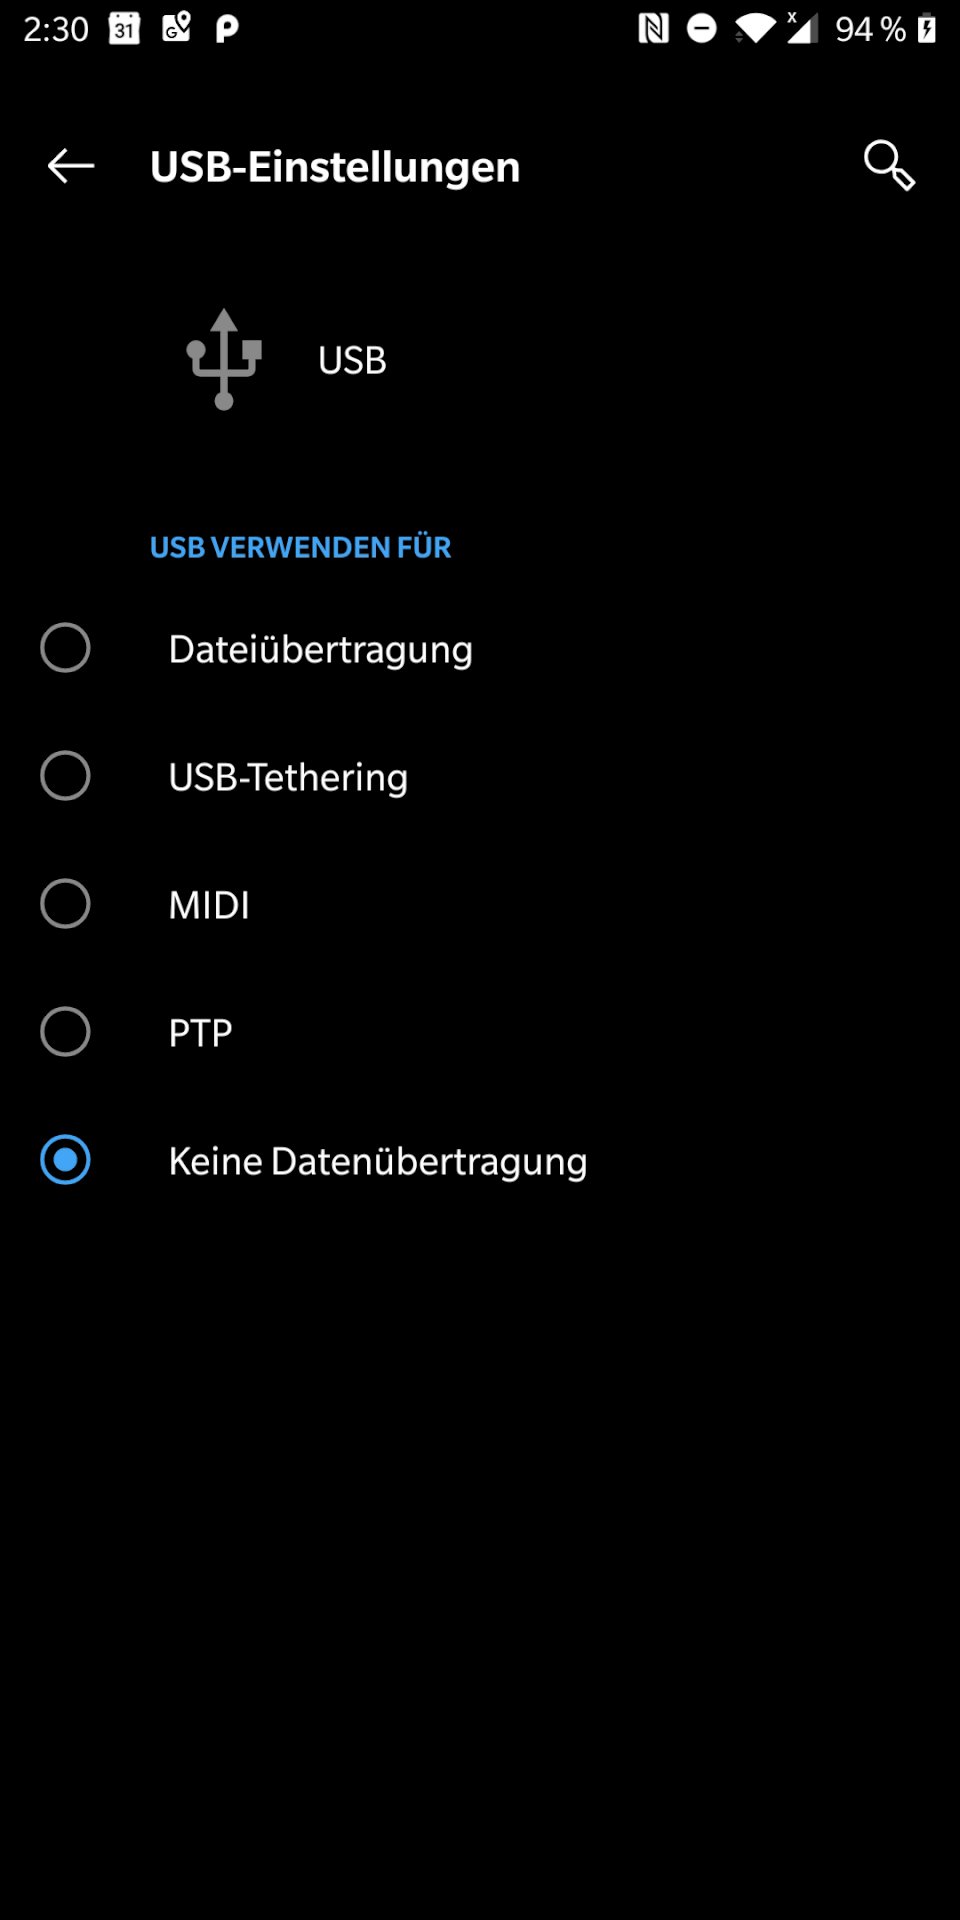 OnePlus 5t data transfer via USB to Mac is not working - 1